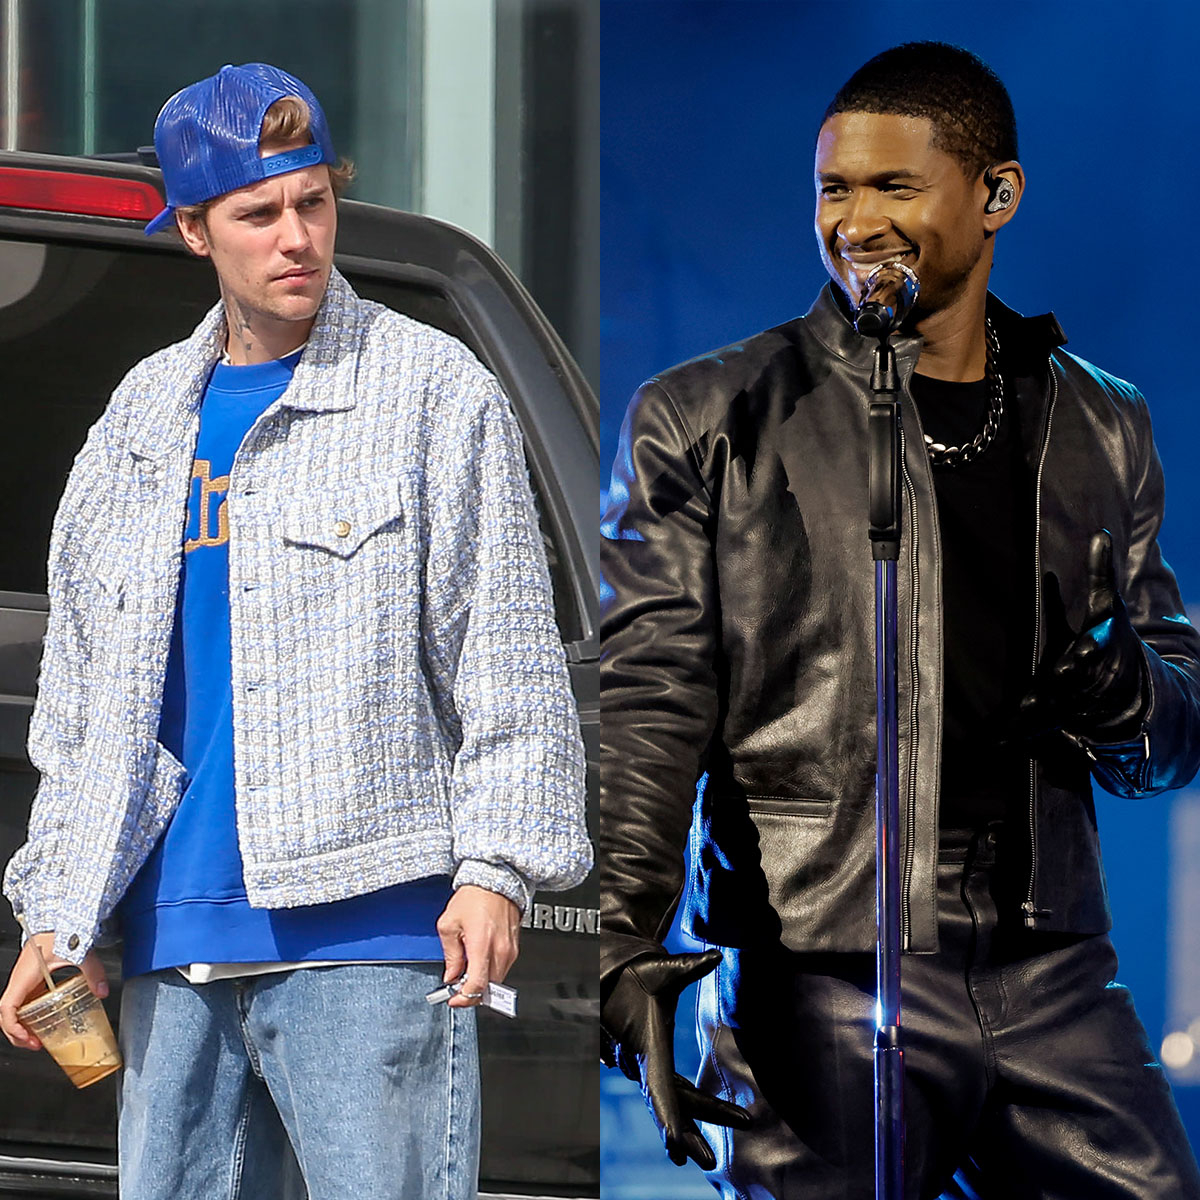 The Real Reason Why Justin Bieber Turned Down Usher’s 2024 Super Bowl Halftime Show Invite